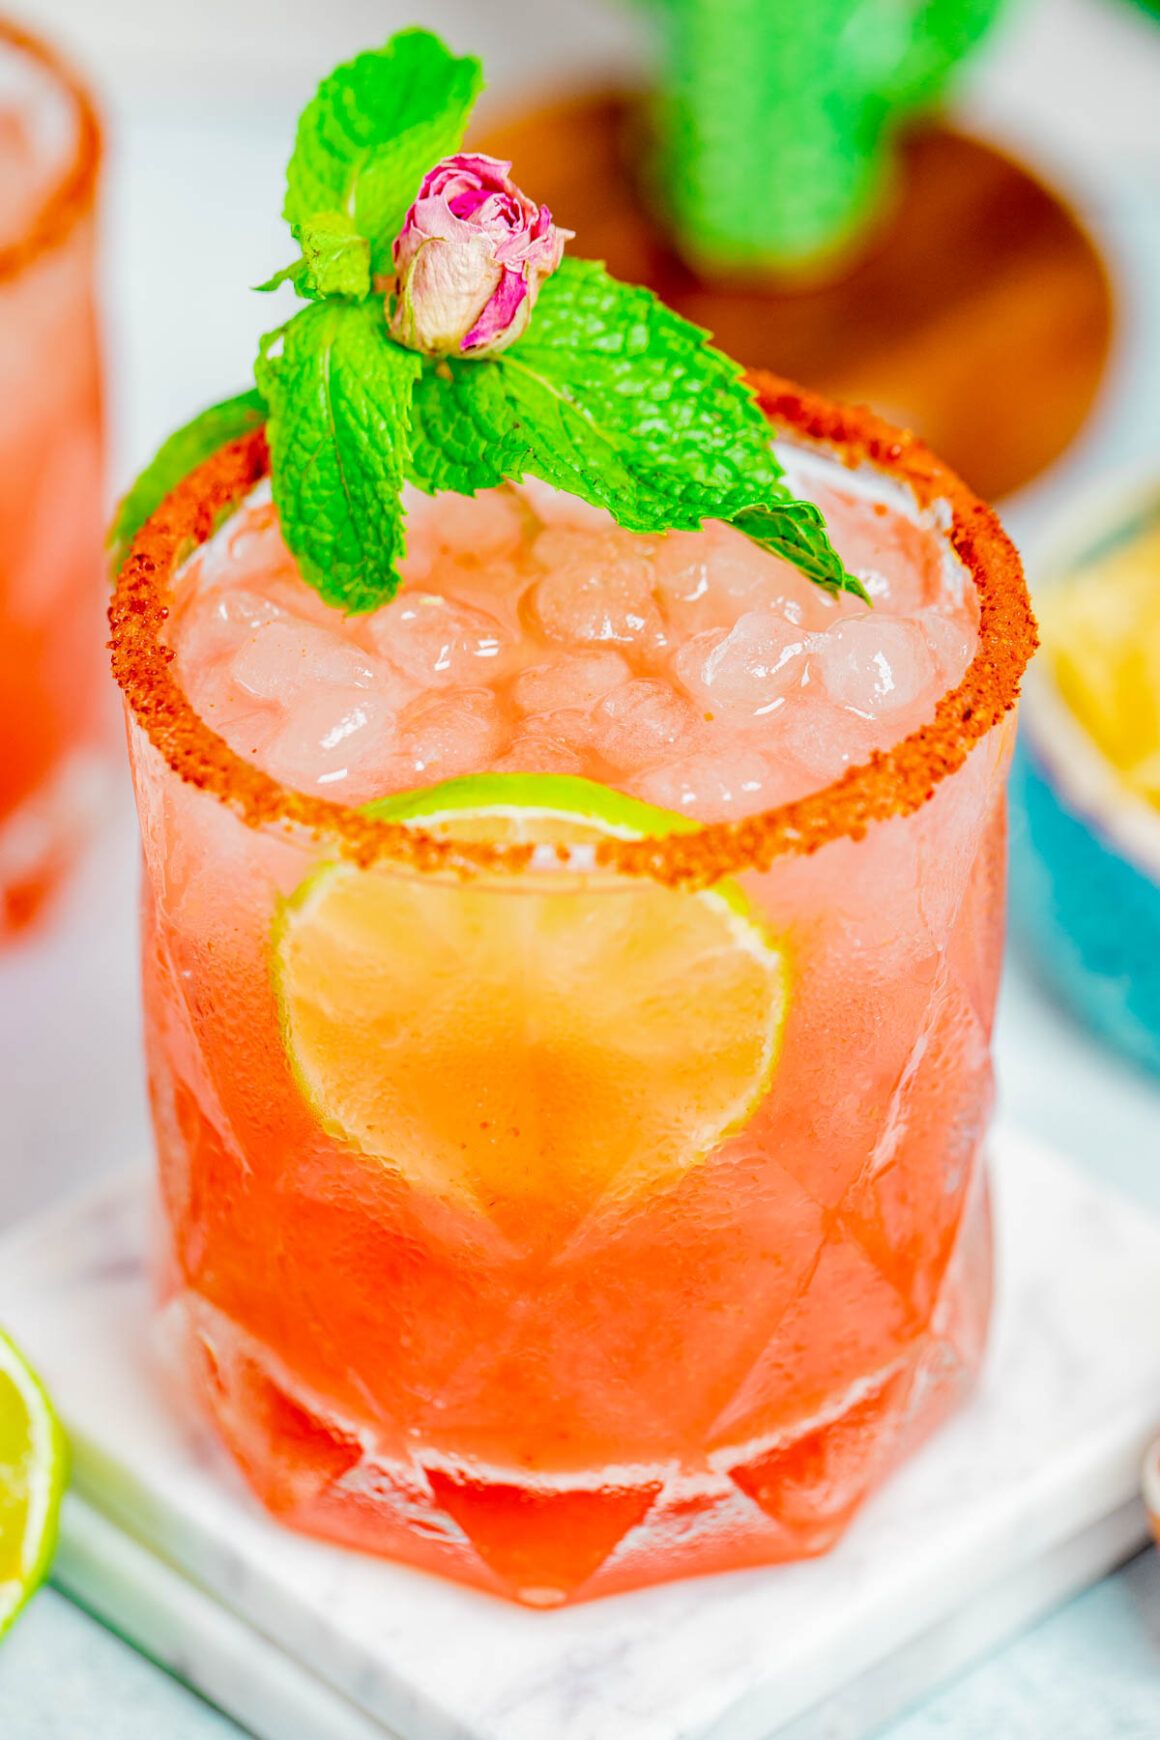 If you're in the mood for a refreshing, tropical twist on a classic cocktail, look no further!